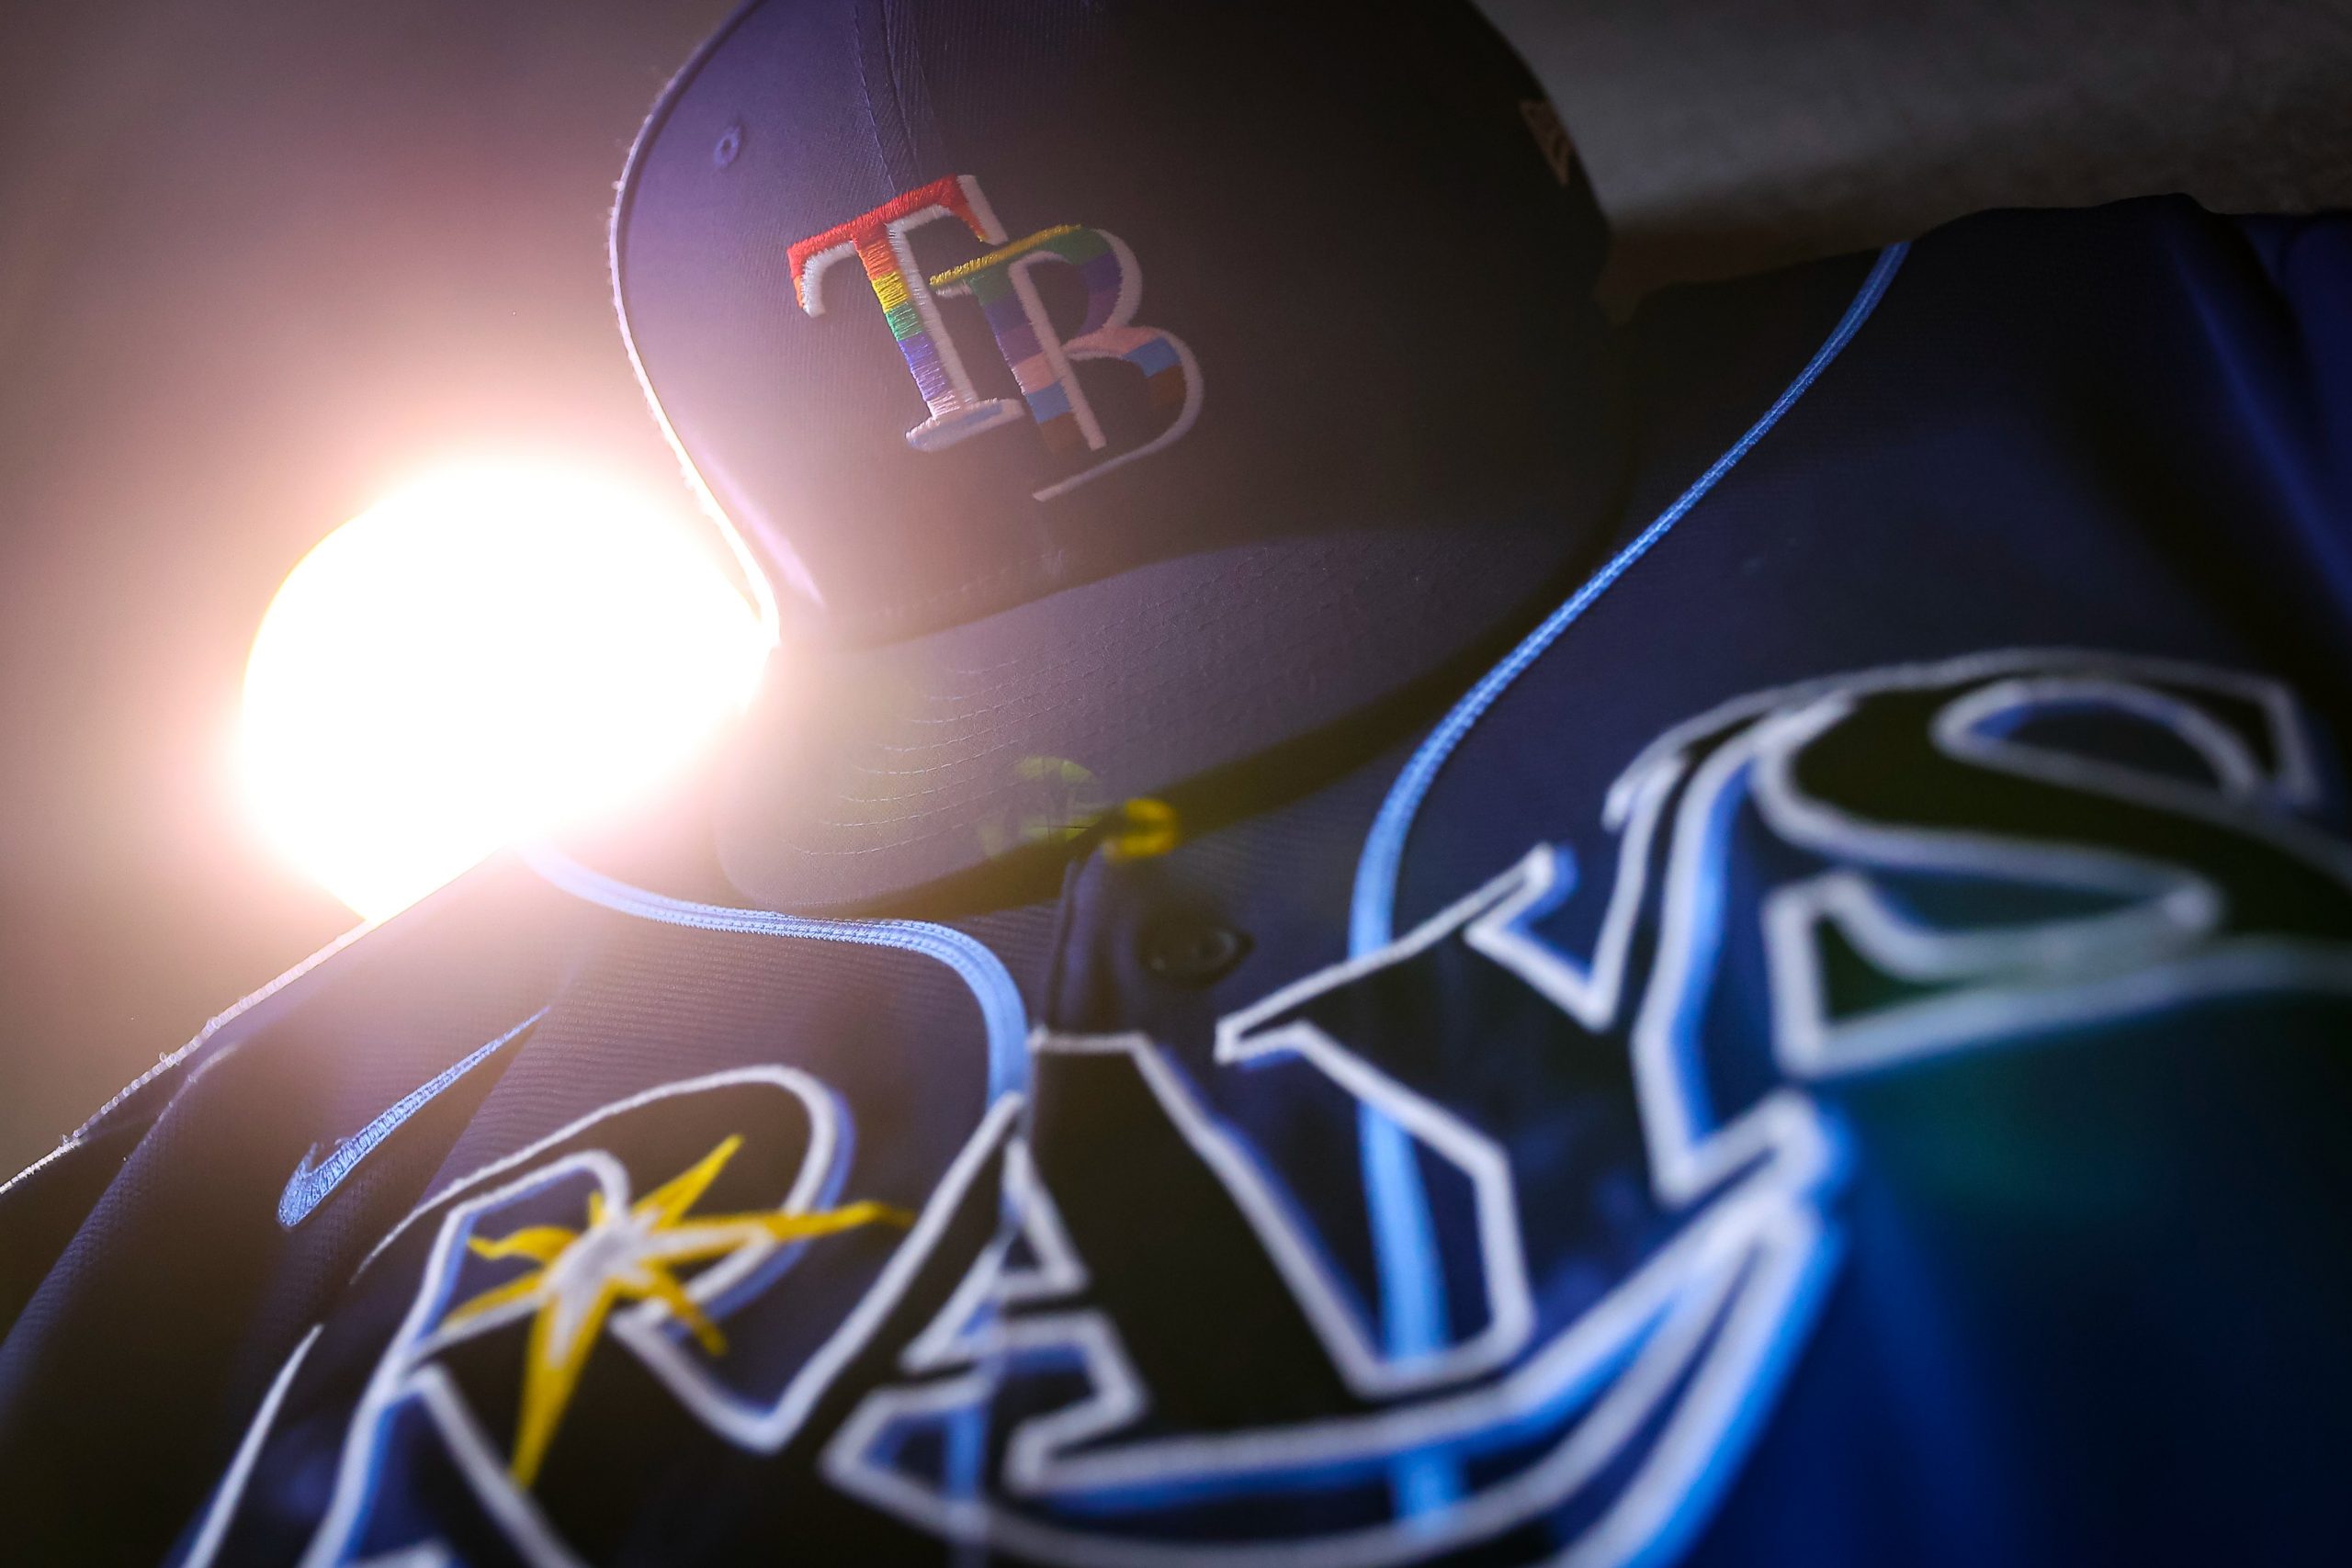 Tonight is Pride Night at the Rays game Rangers showdown this evening at  The Trop. The Rays organization is doing the right thing with the  celebration. - Sports Talk Florida - N